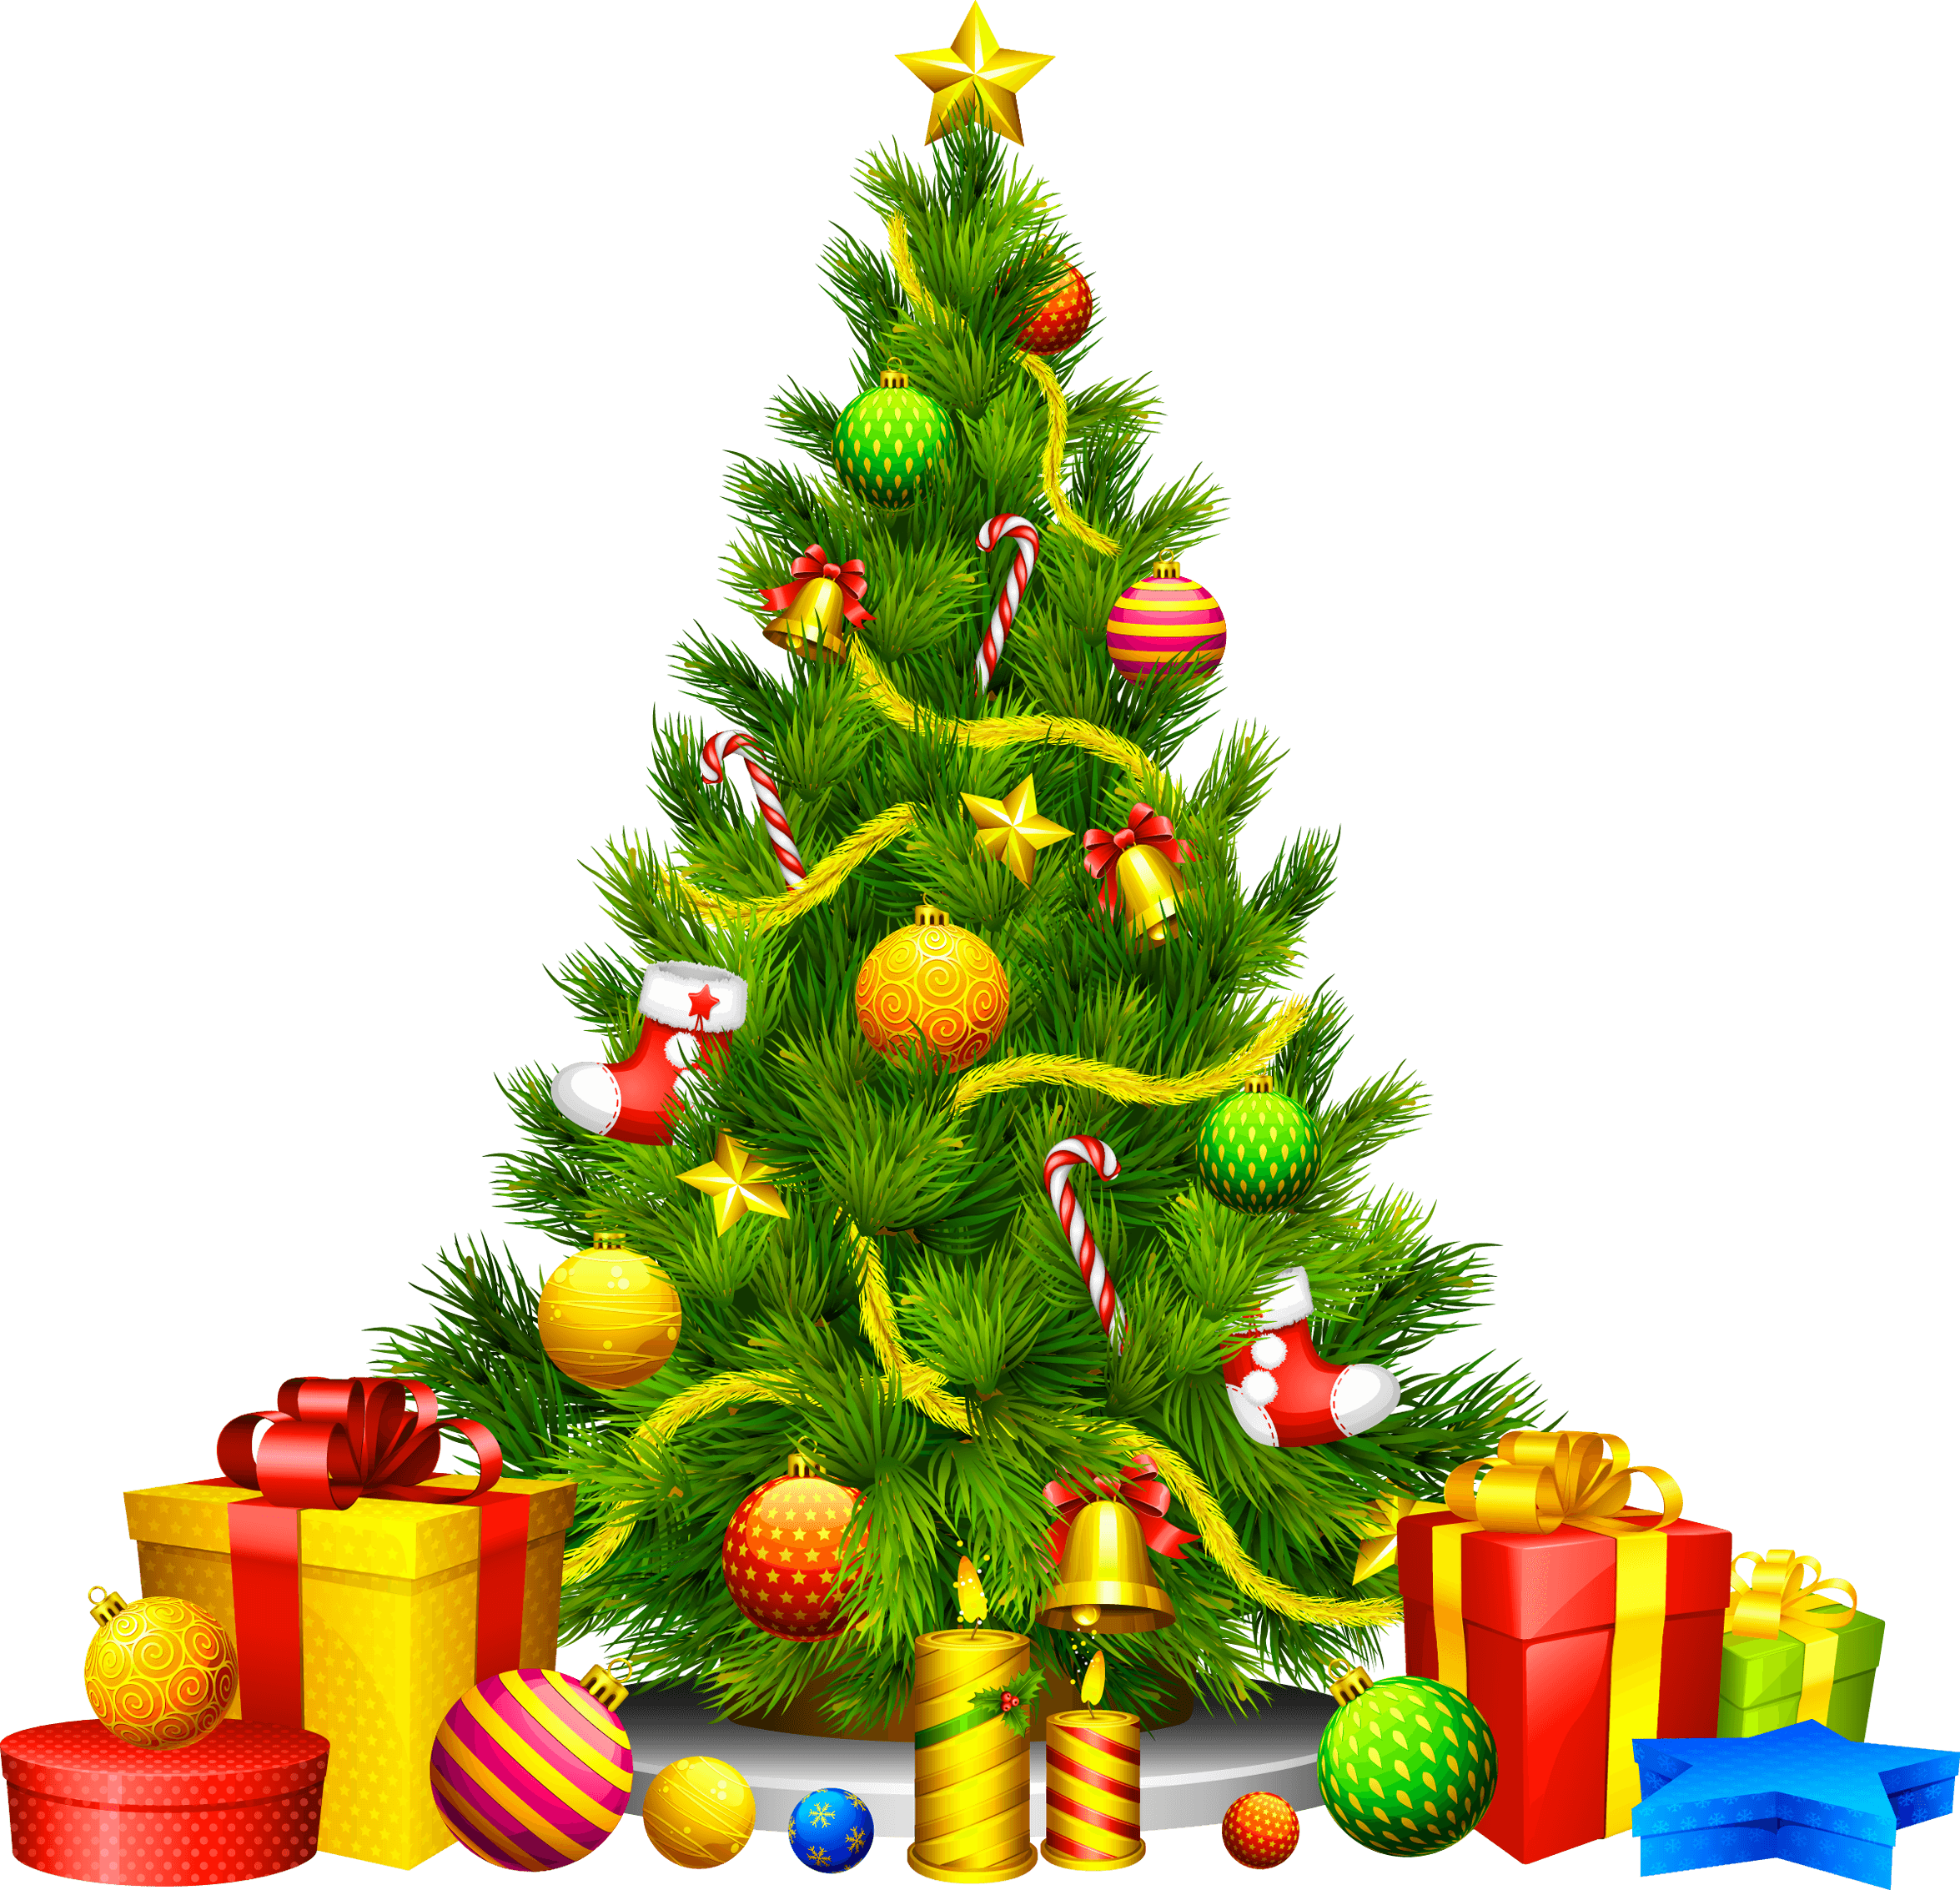 Gifts Fir-Tree Christmas PNG Image High Quality PNG Image